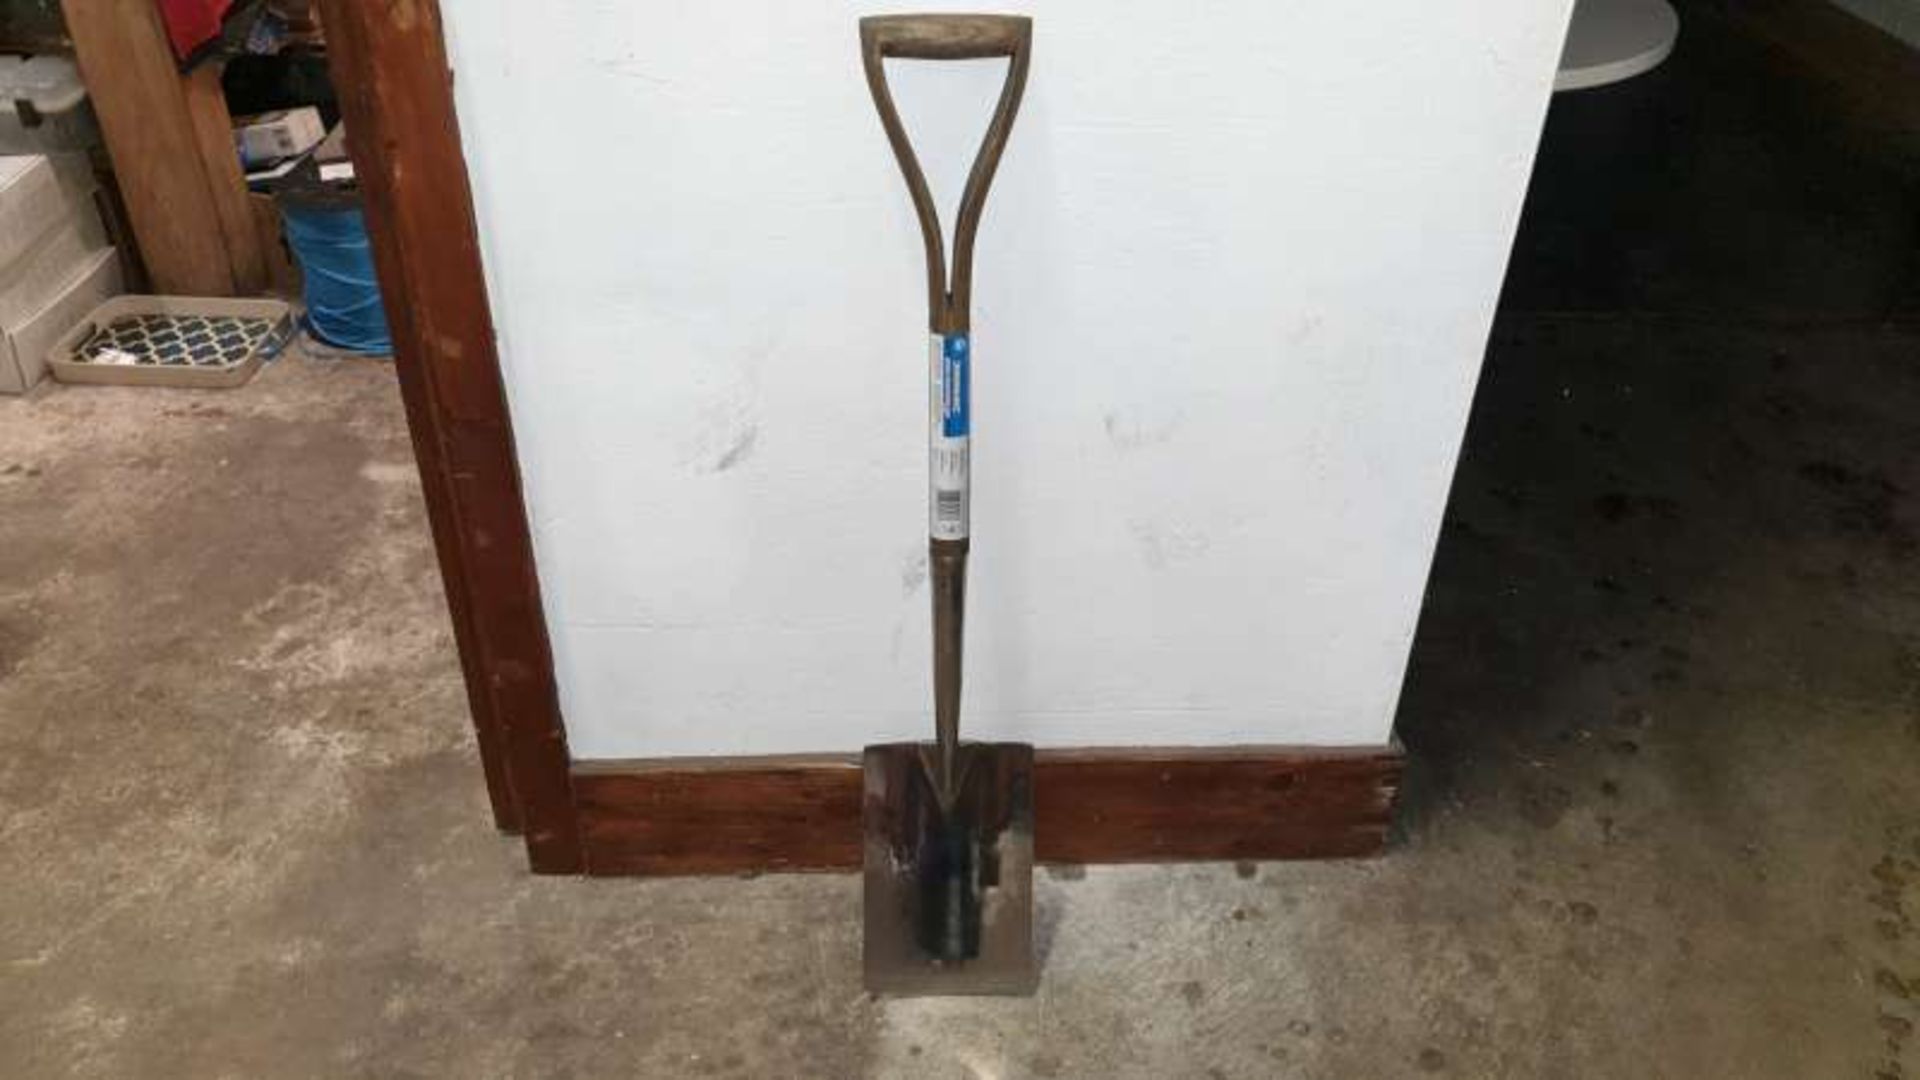 6 X BRAND NEW SILVERLINE POLISHED ASH HANDLE STAINLESS STEEL GARDENING SPADE 1000MM